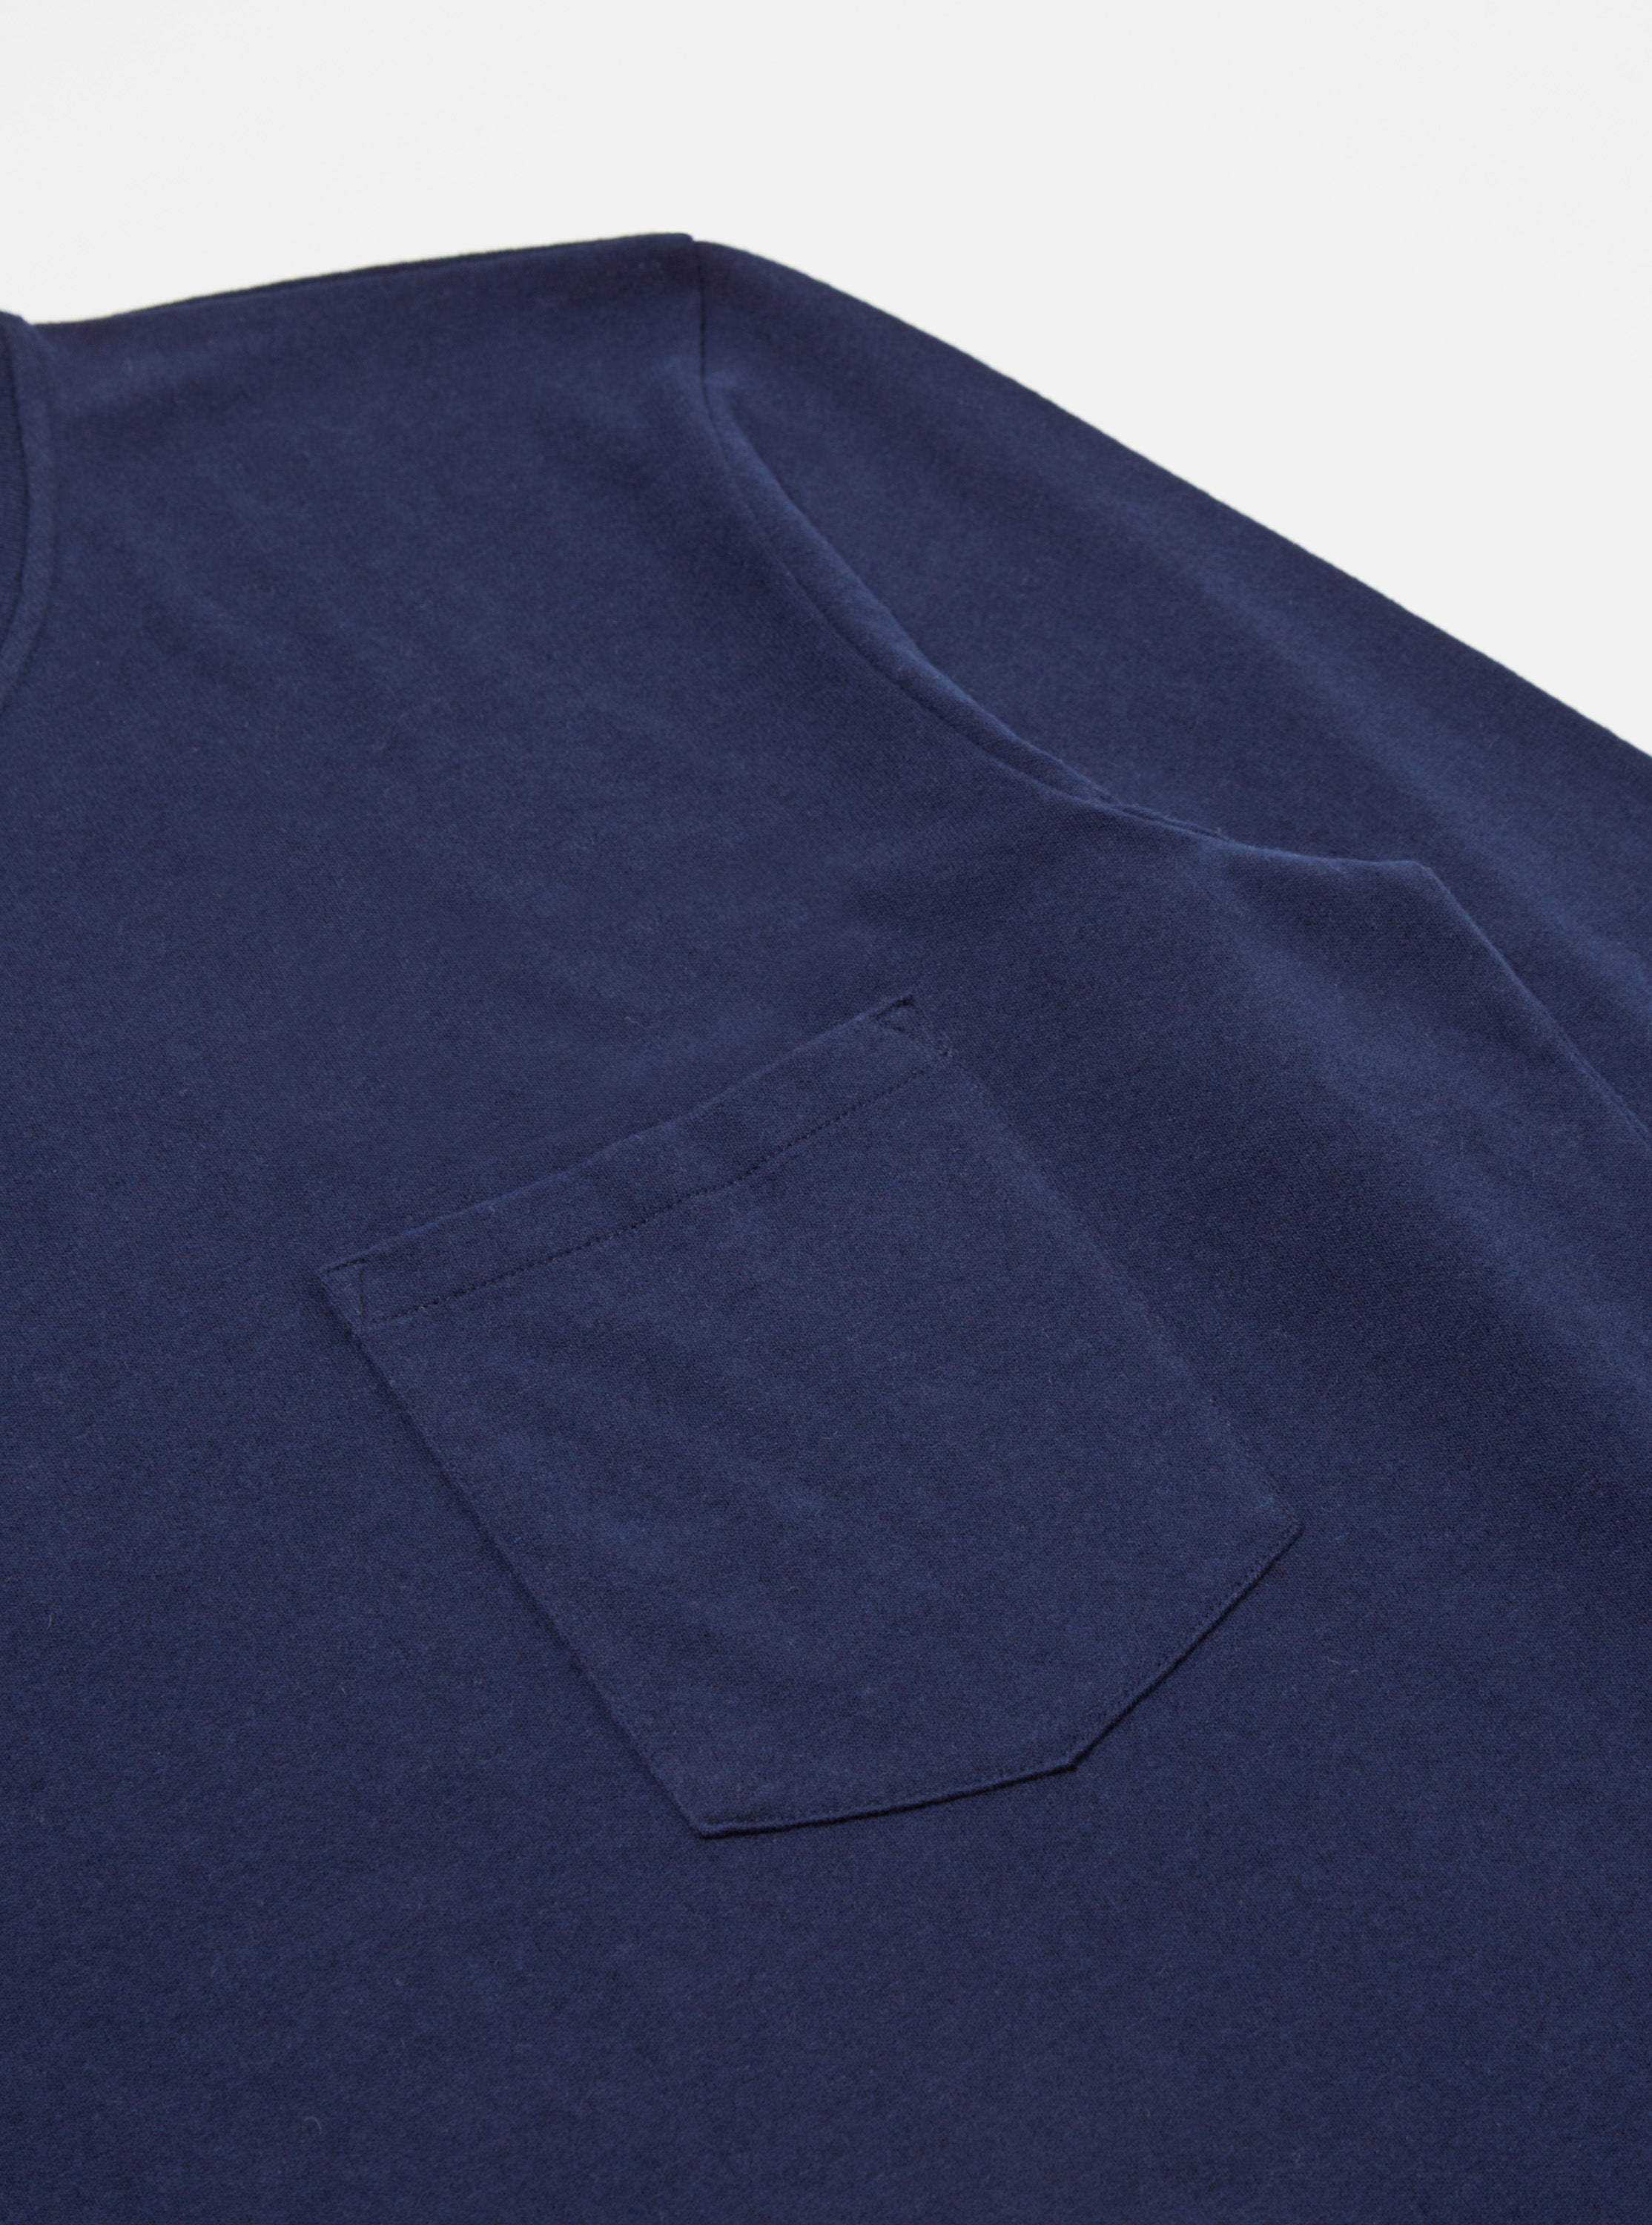 Universal Works L/S Big Pocket Tee in Navy Recycled Wool Mix SJ